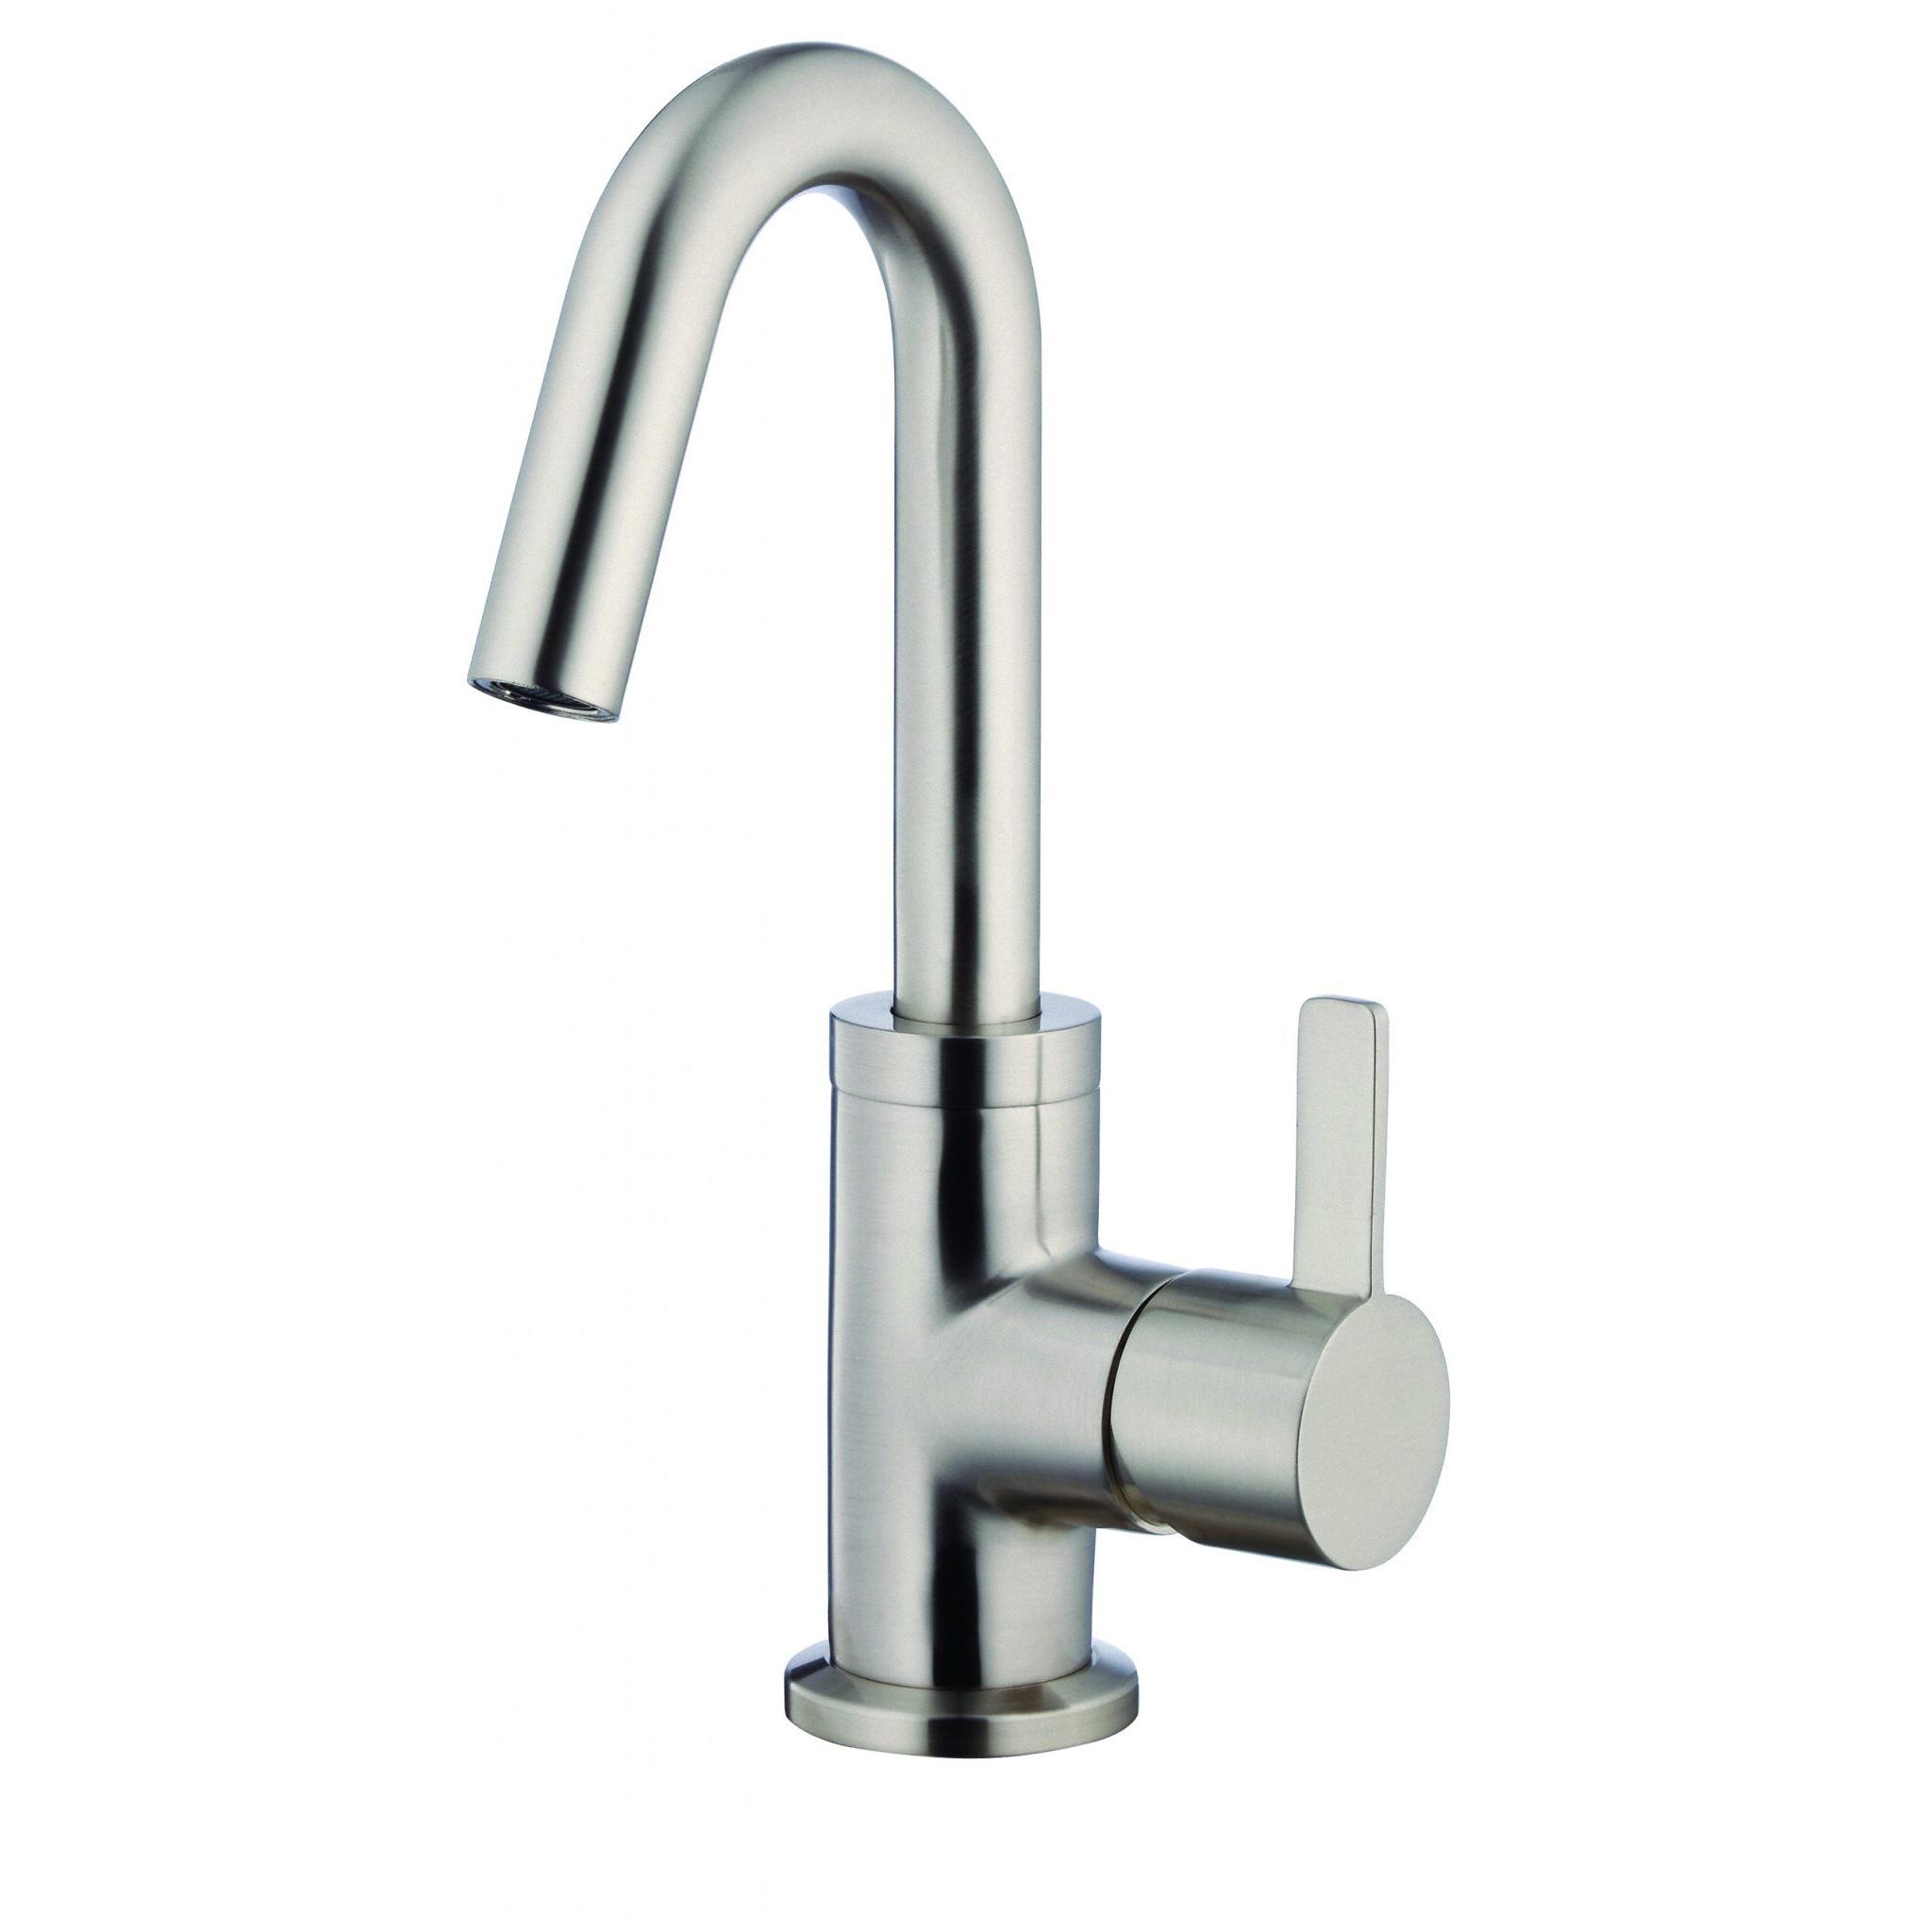 Danze D222530BN Amalfi 1H Lavatory Faucet Single Hole Mount w/ 50/50 Touch Down Drain & Optional Deck Plate Included - Brushed Nickel